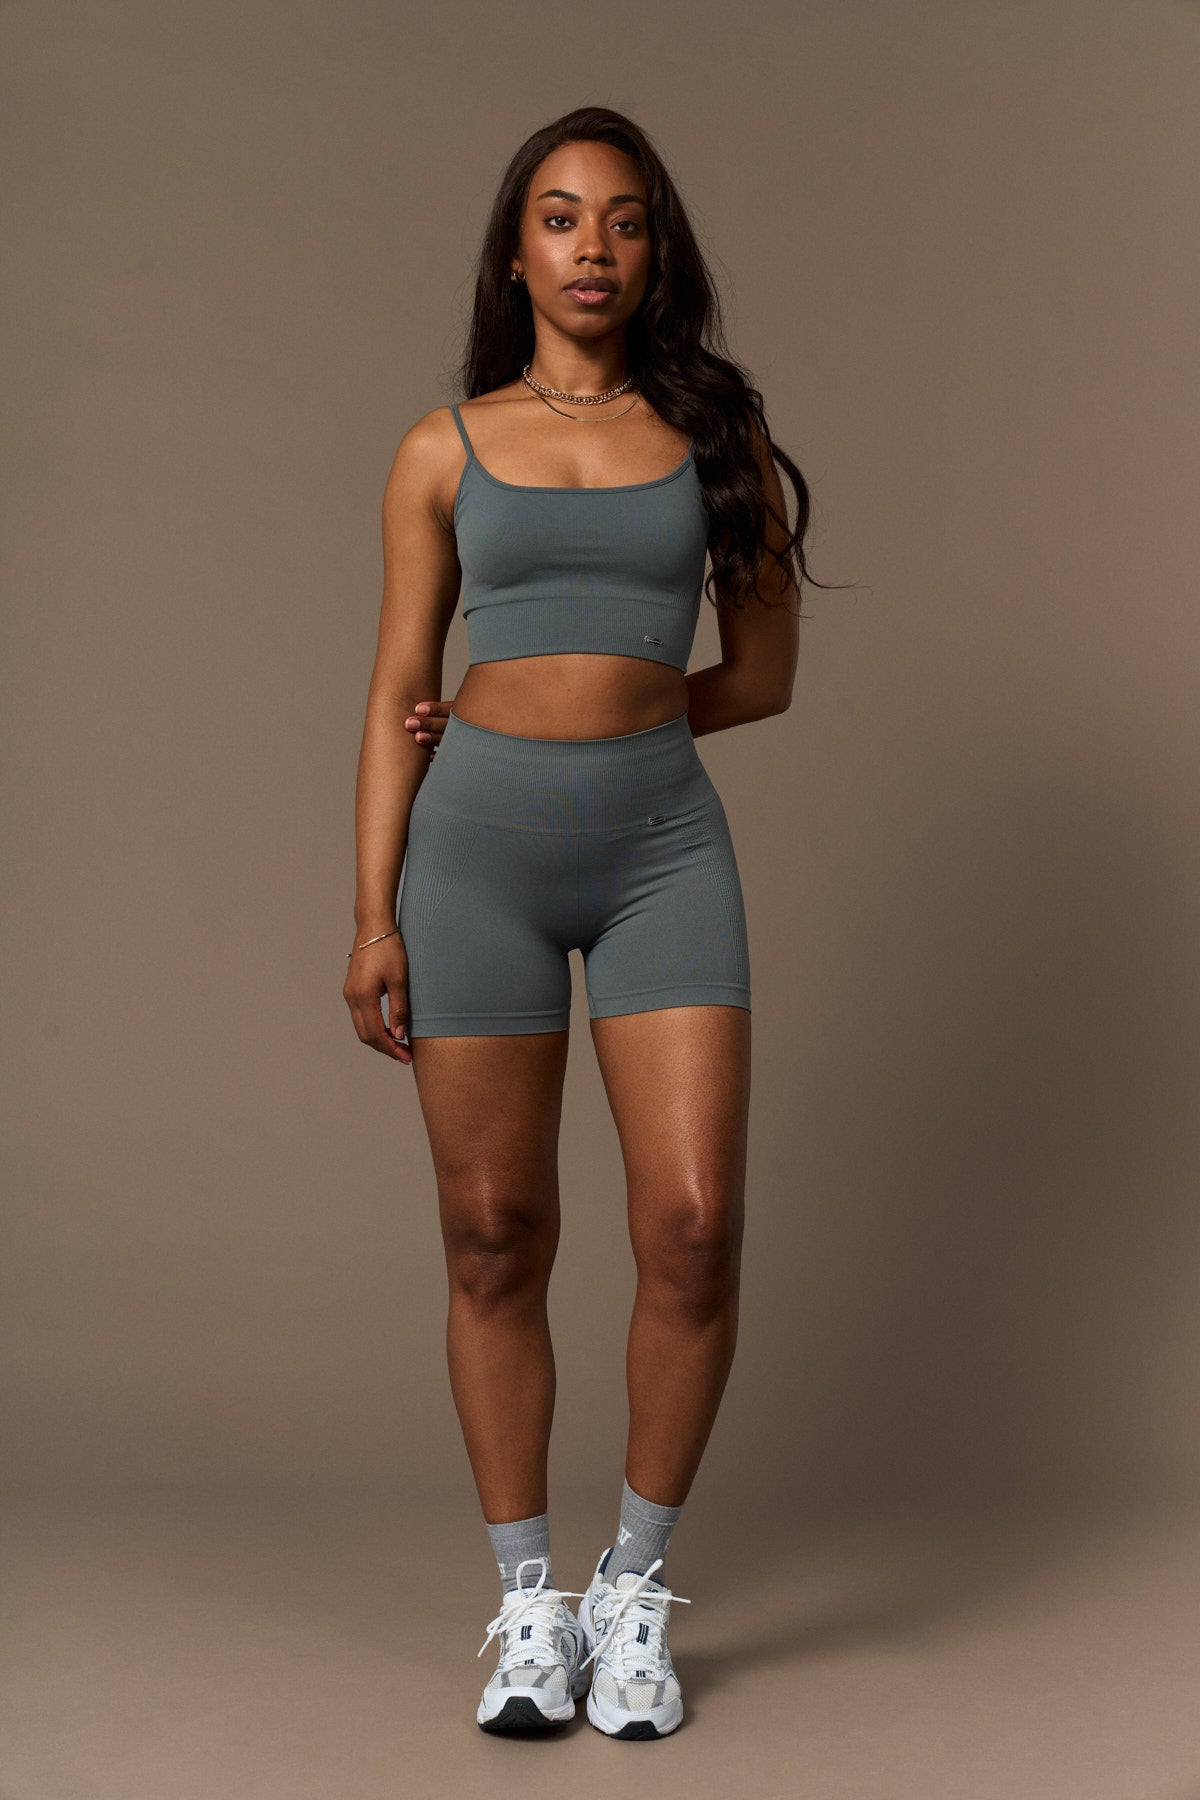 Bliss Short Push-Up en Gris-Shorts-Tienda Ropa Leggings Yoga Sostenibles Reciclados Mujer On-line Barcelona Believe Athletics Sustainable Recycled Yoga Clothes